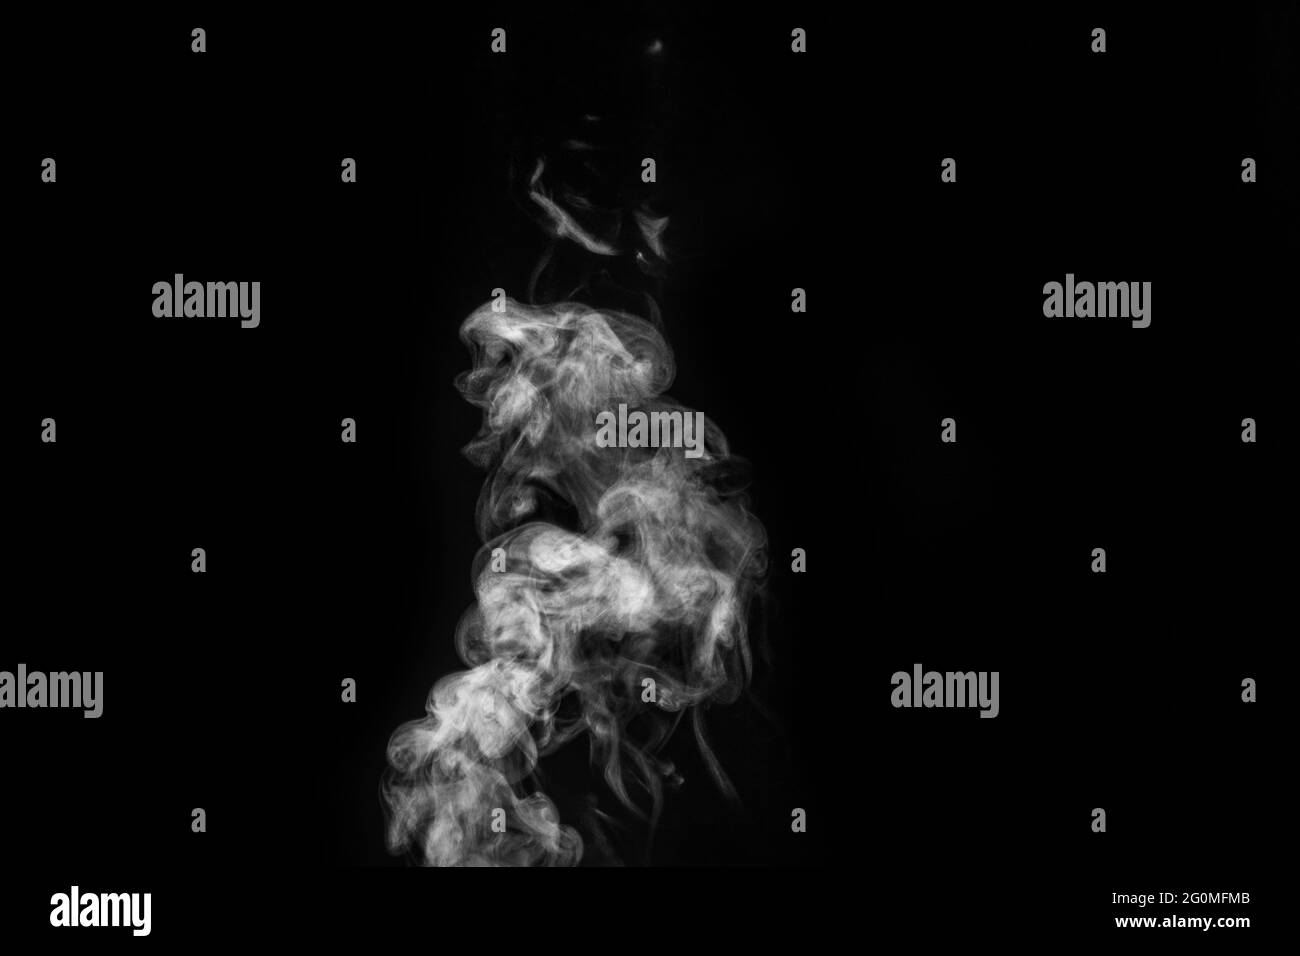 Smoke fragments on a black background. Abstract background, design element, for overlay on pictures. Stock Photo